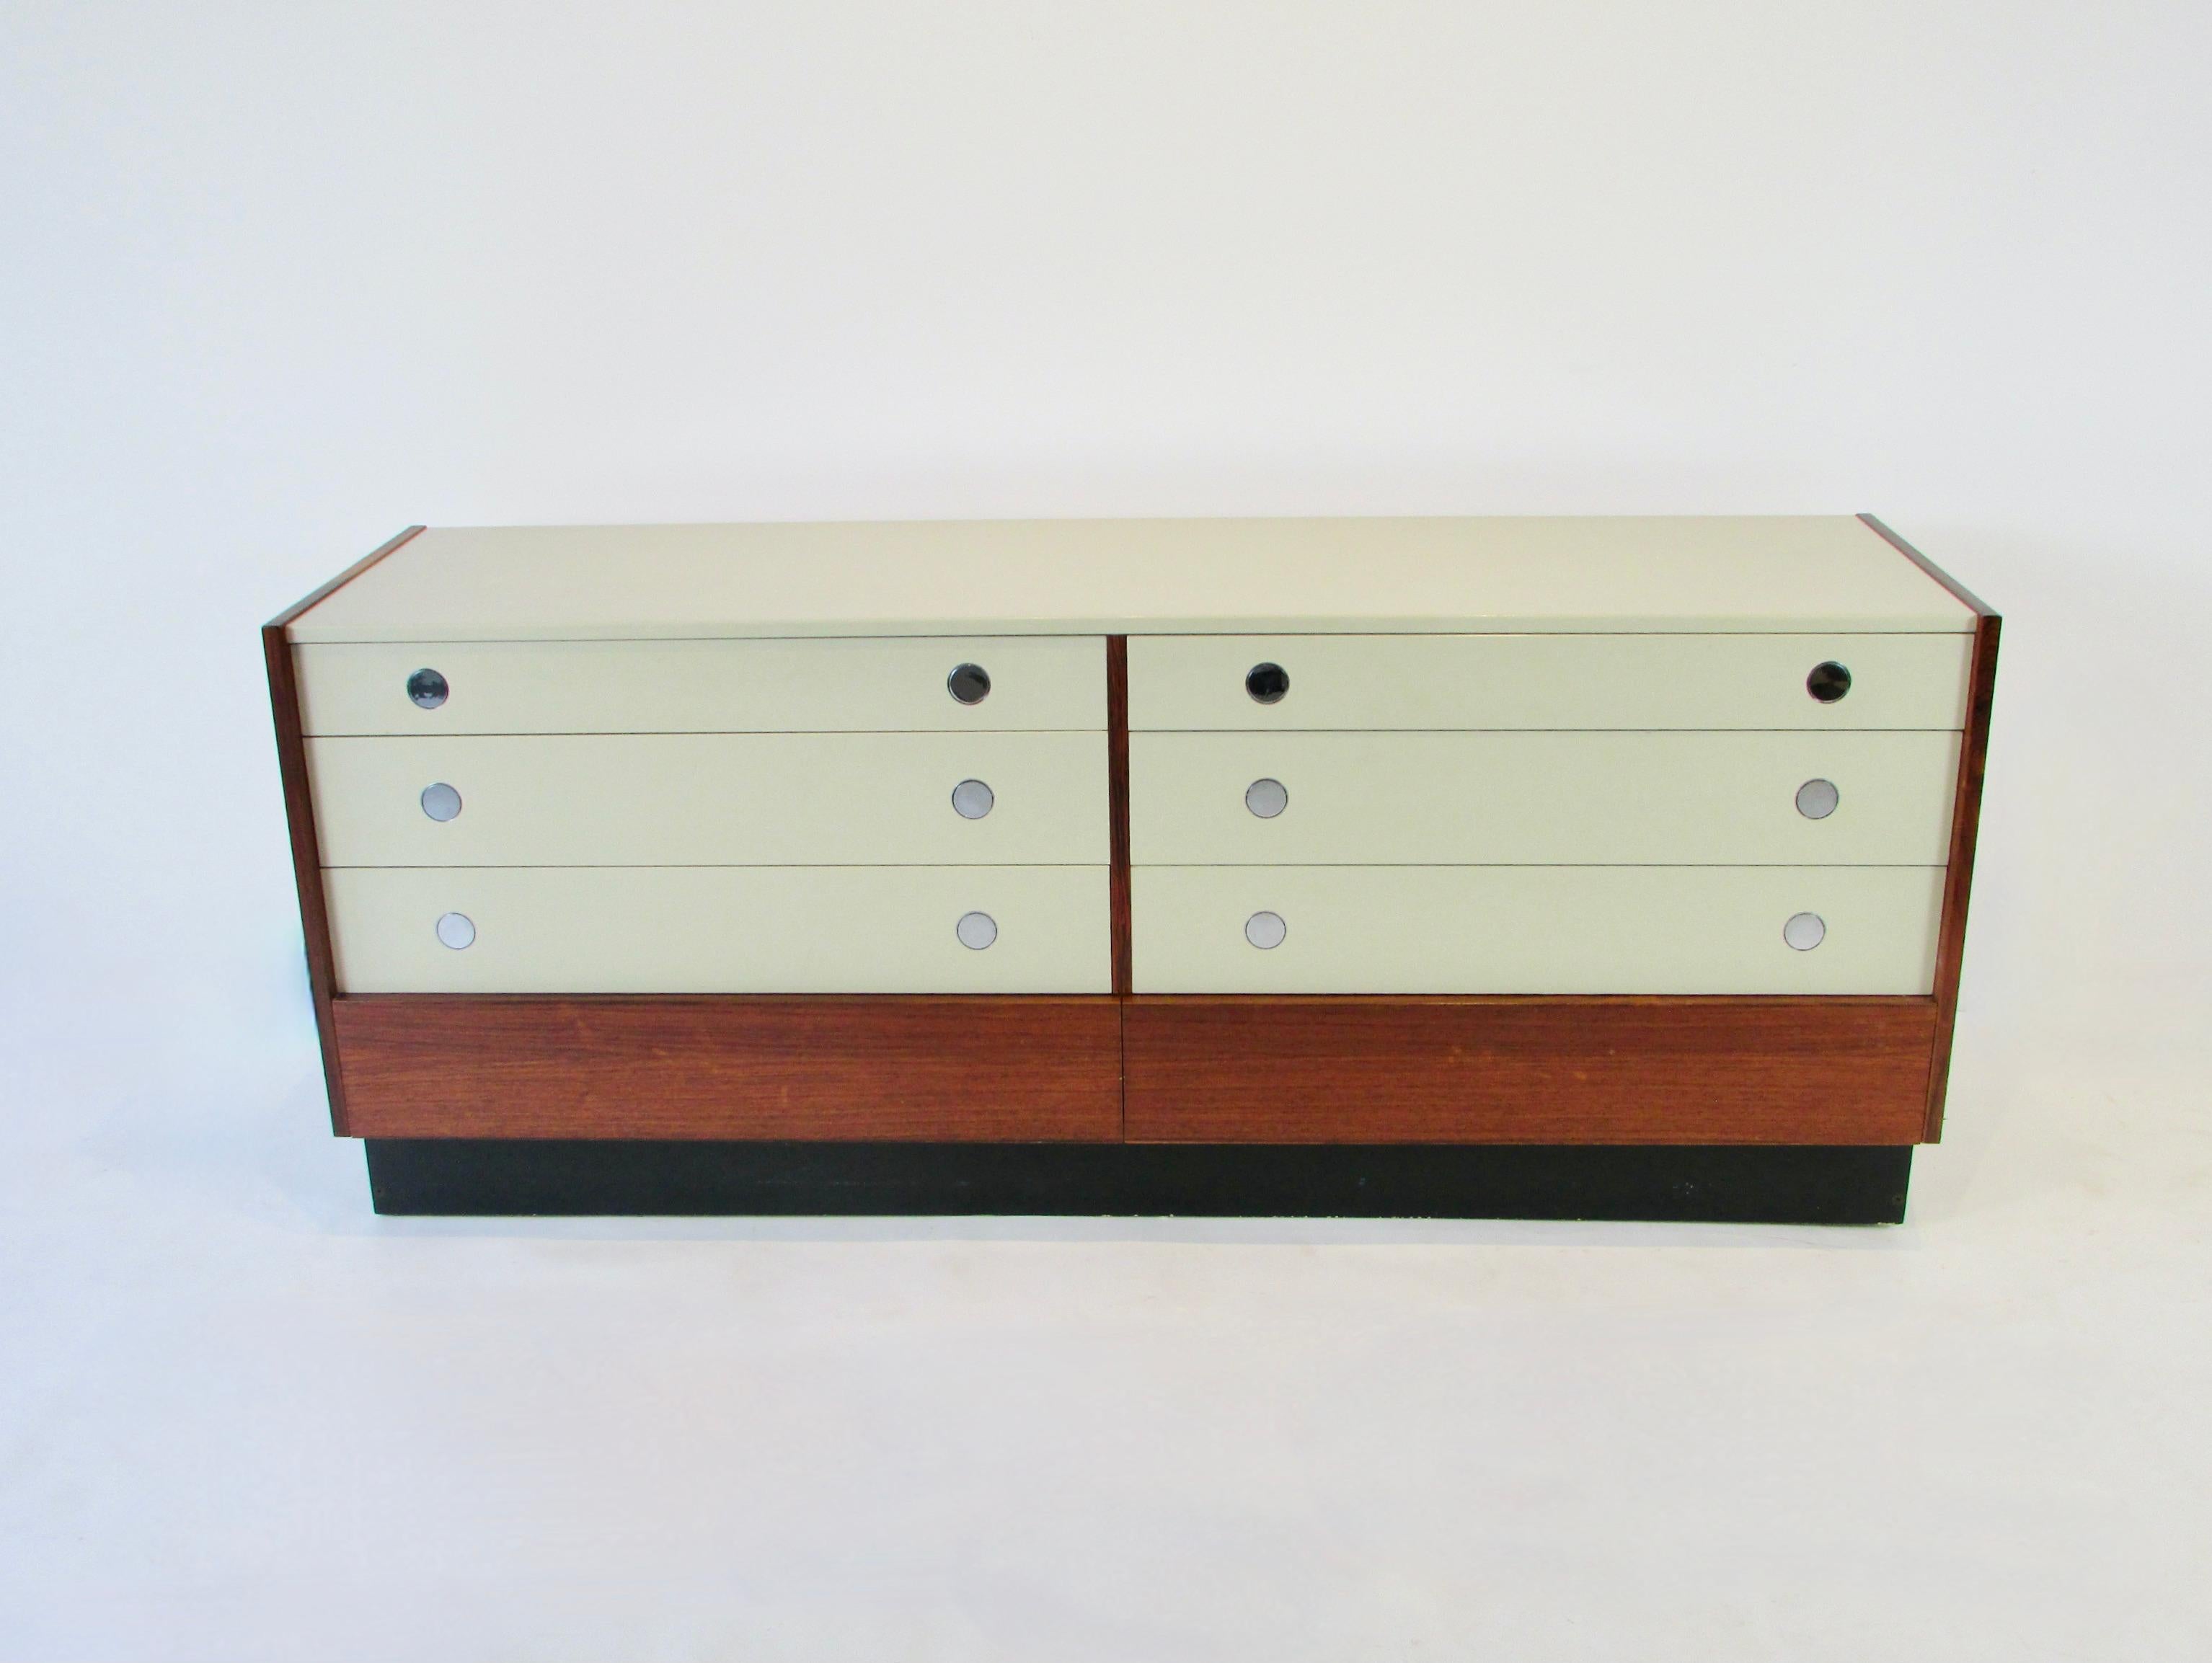 Eight drawer double dresser by Drylund. Original label inside top drawer. Rosewood cabinet holds two rows of three lacquered drawers over a lower rosewood drawer. Upper drawers have chrome disc drawer pulls that turn horizontally as you touch them.